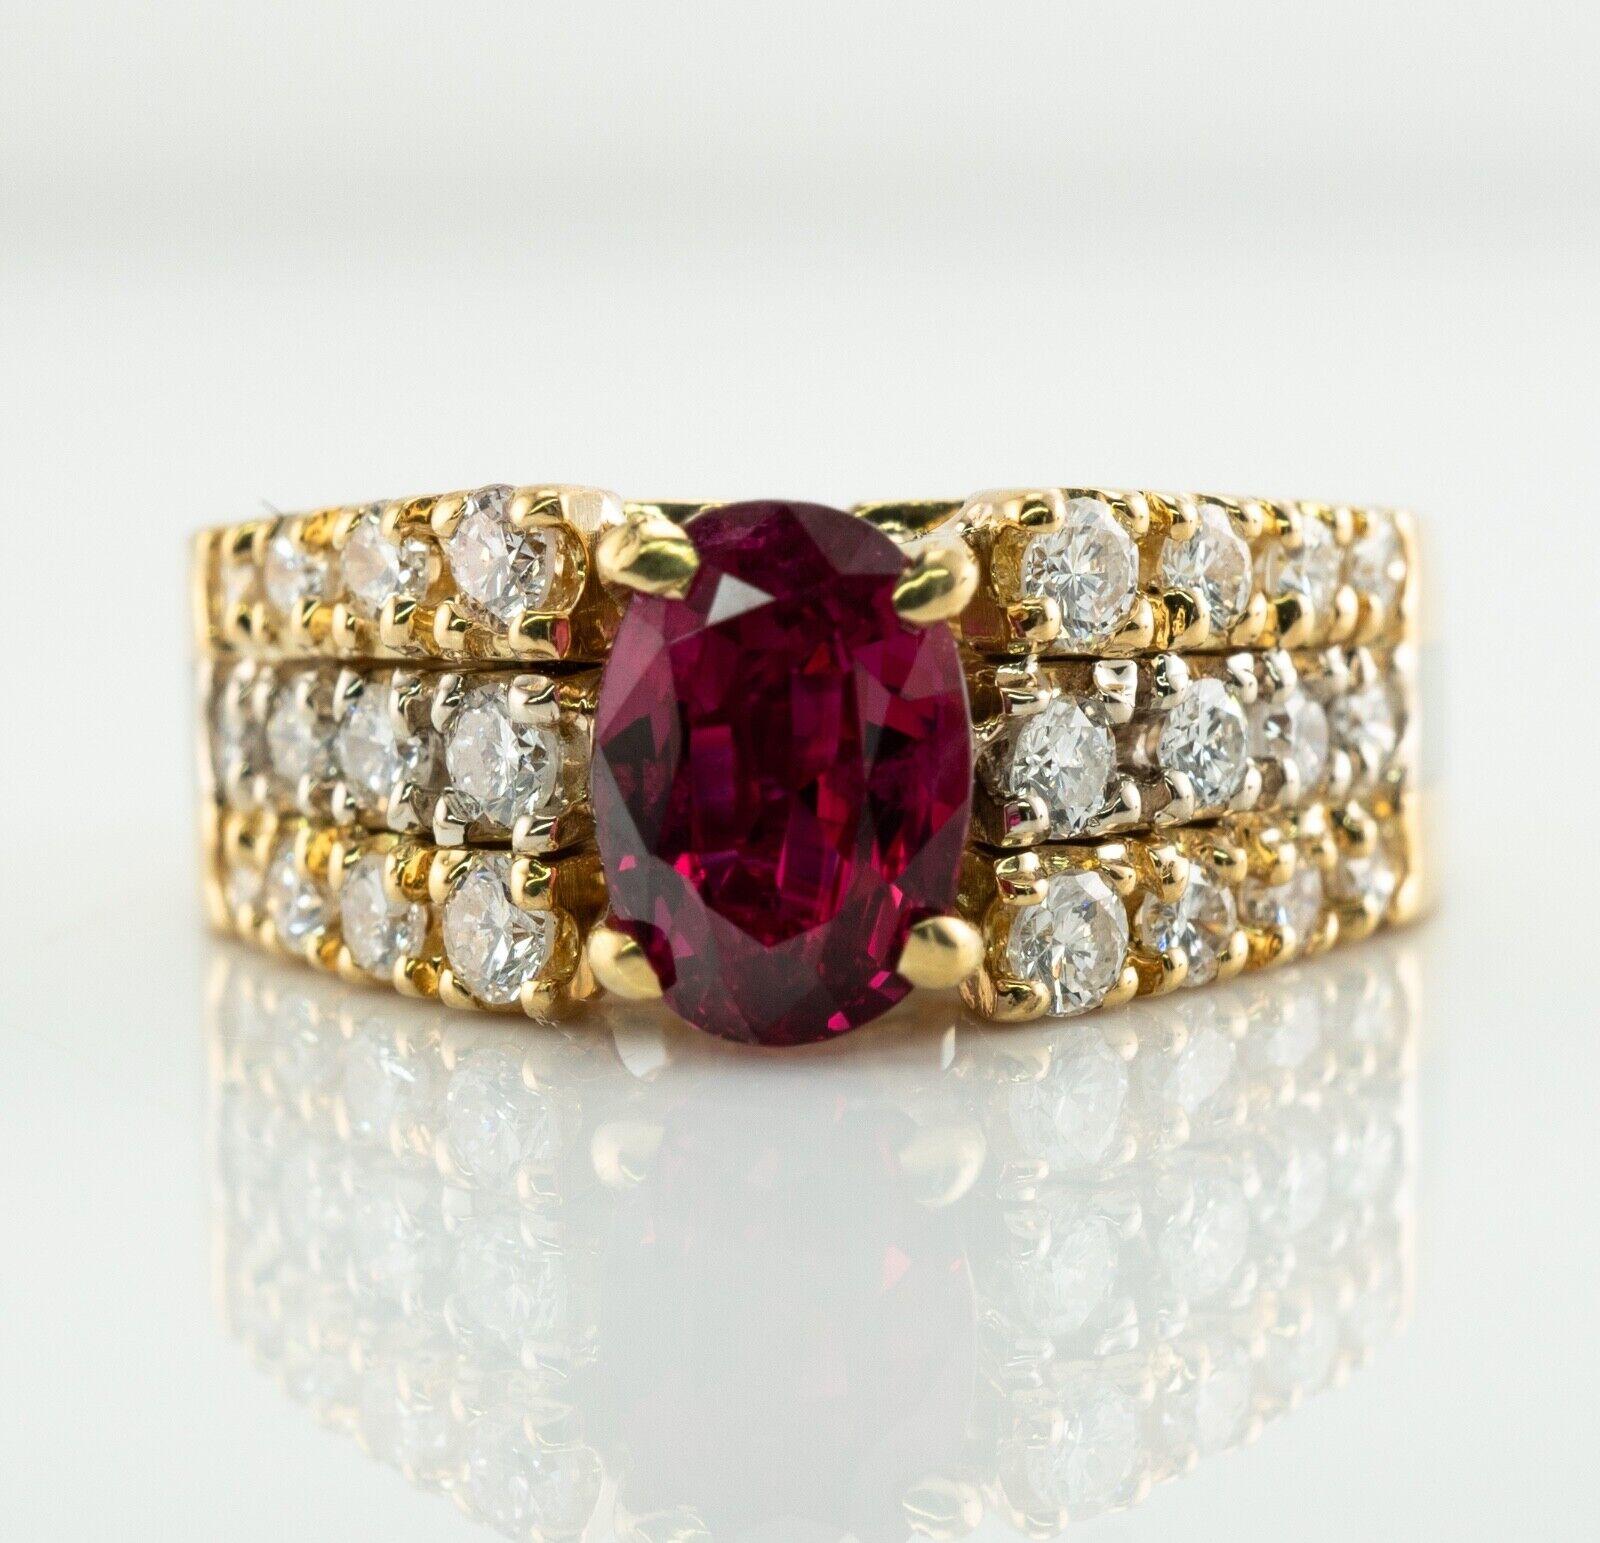 Natural Ruby Diamond Band Ring 18K Gold Vintage

This vintage ring is made in solid 18K Yellow Gold.
It has inscription inside of the shank dated 2.14.82.
The center natural Earth mined Ruby measures 7x5mm (.90 carat).
This stone is very clean and